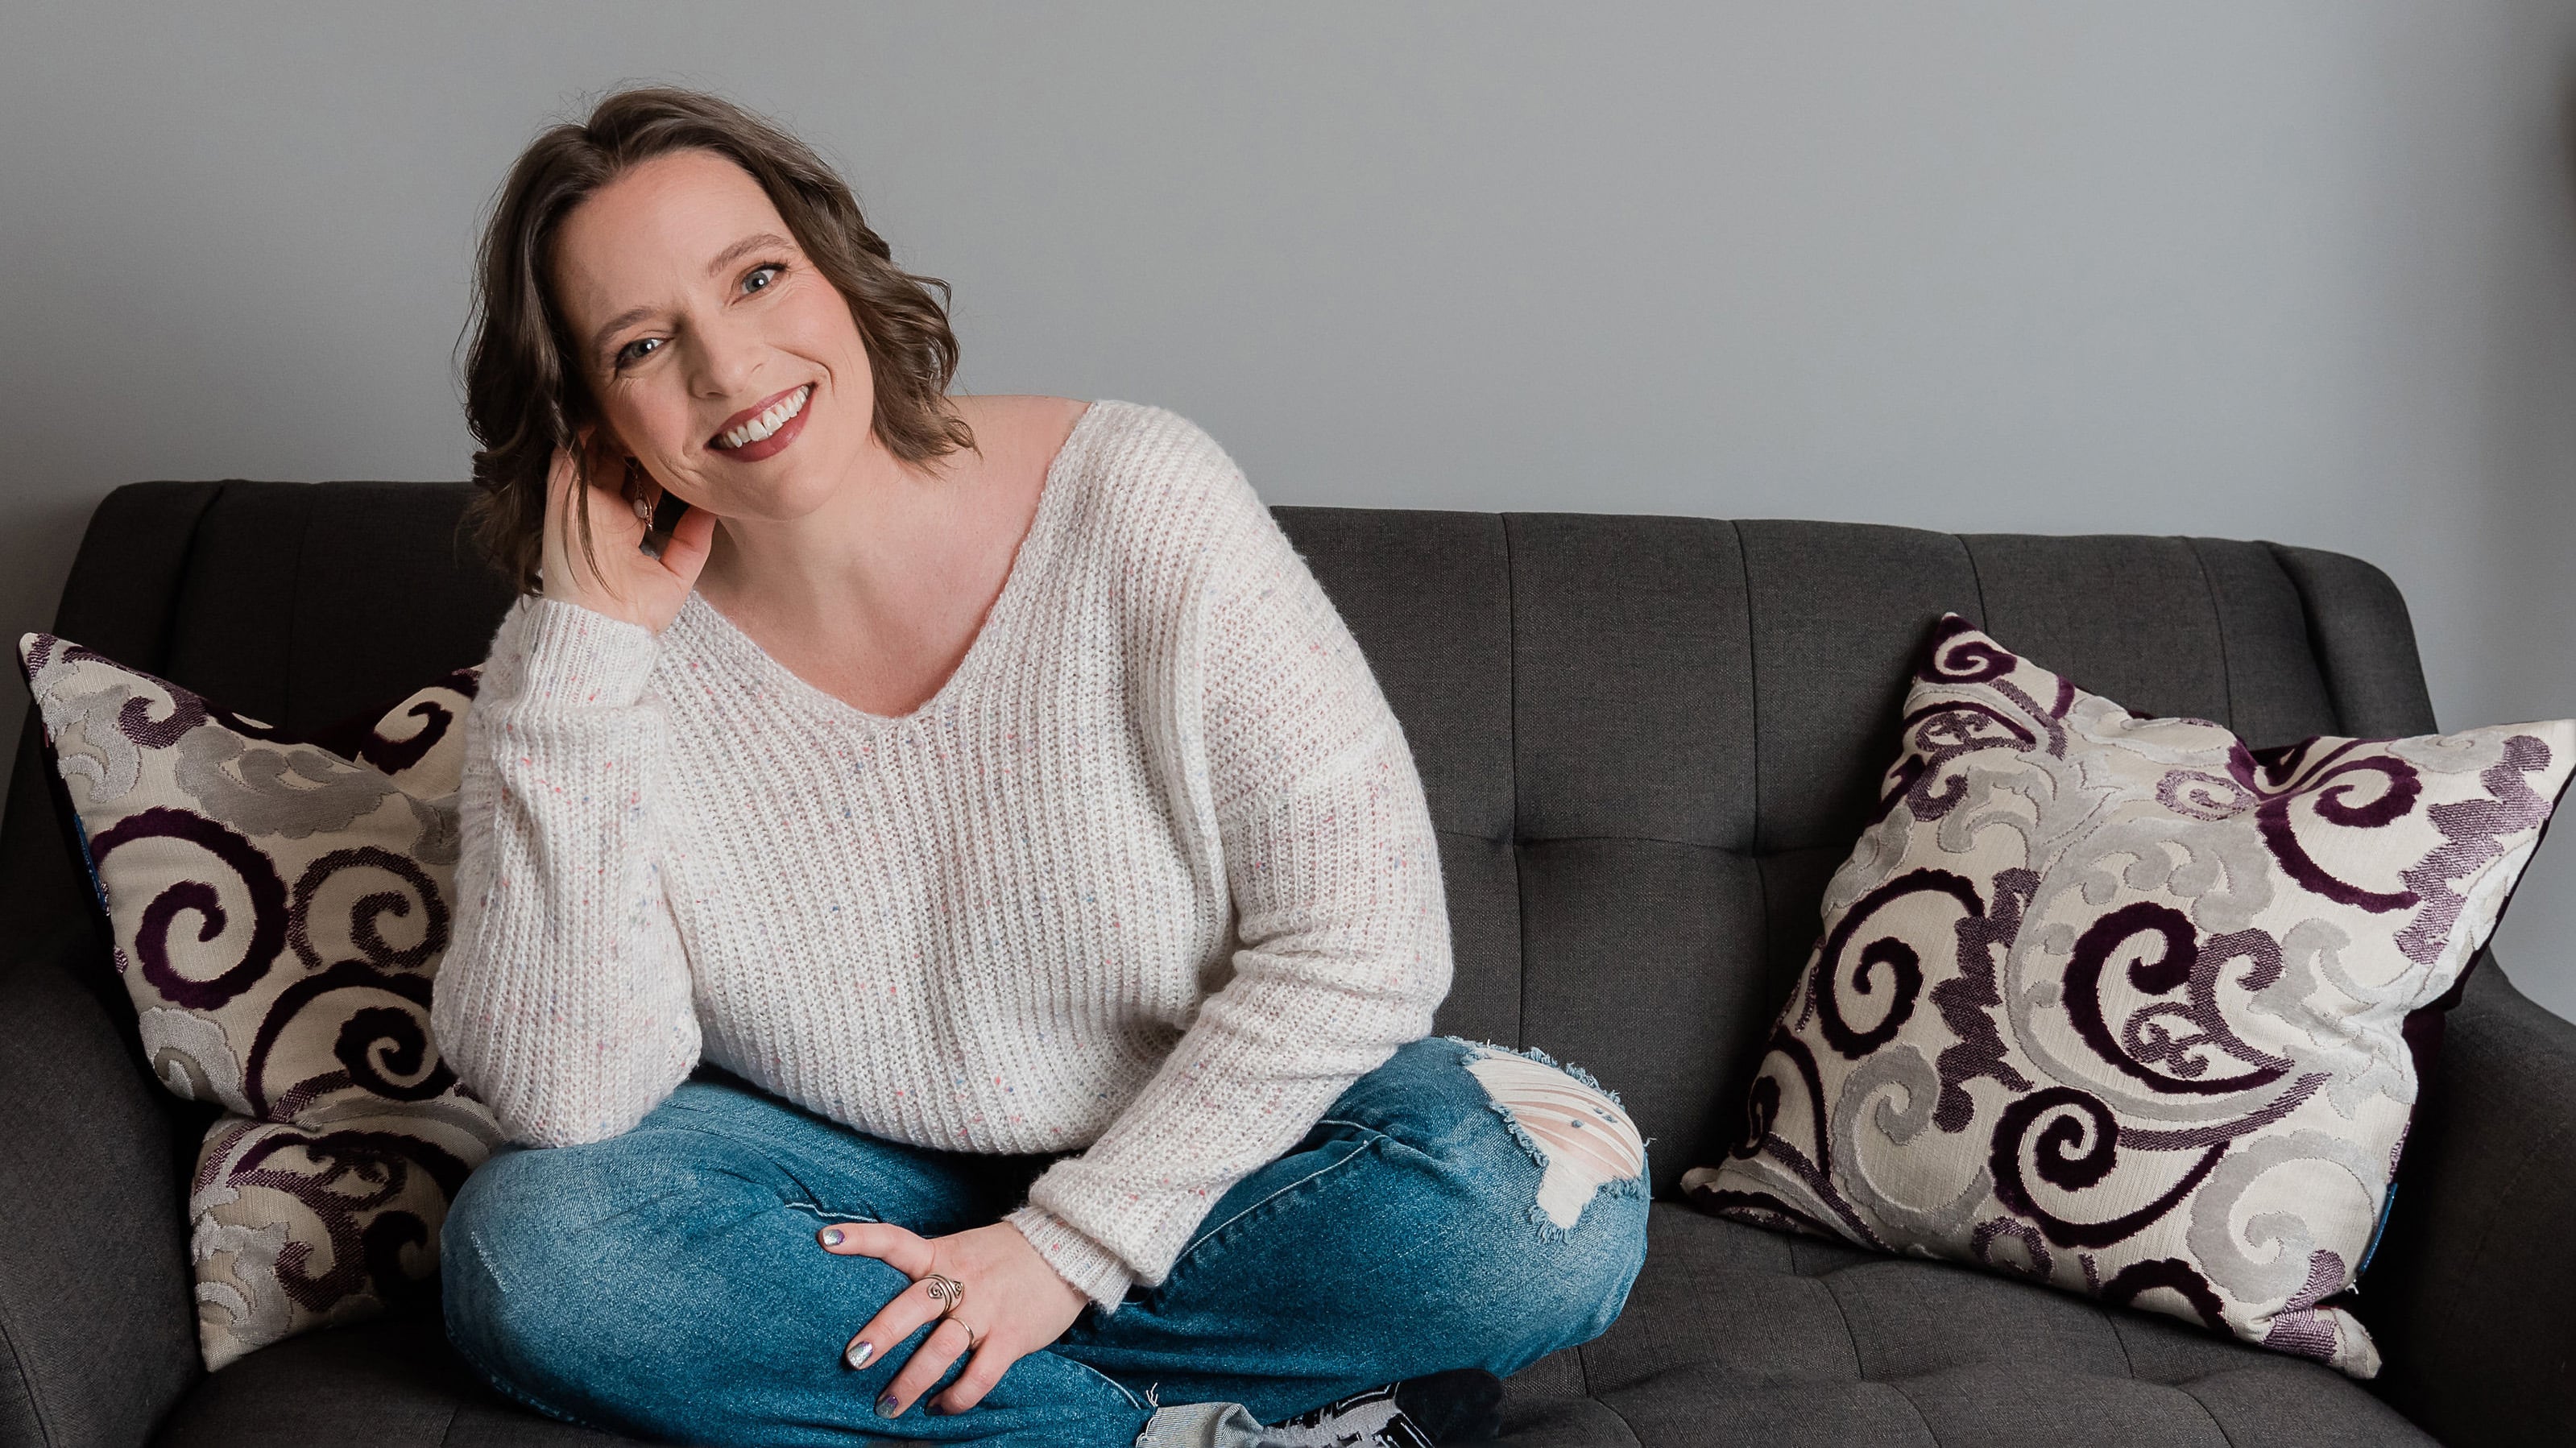 Woman sitting on a charcoal grey couch, smiling wearing blue jeans and a white sweater, sitting legs crossed with feet on couch.